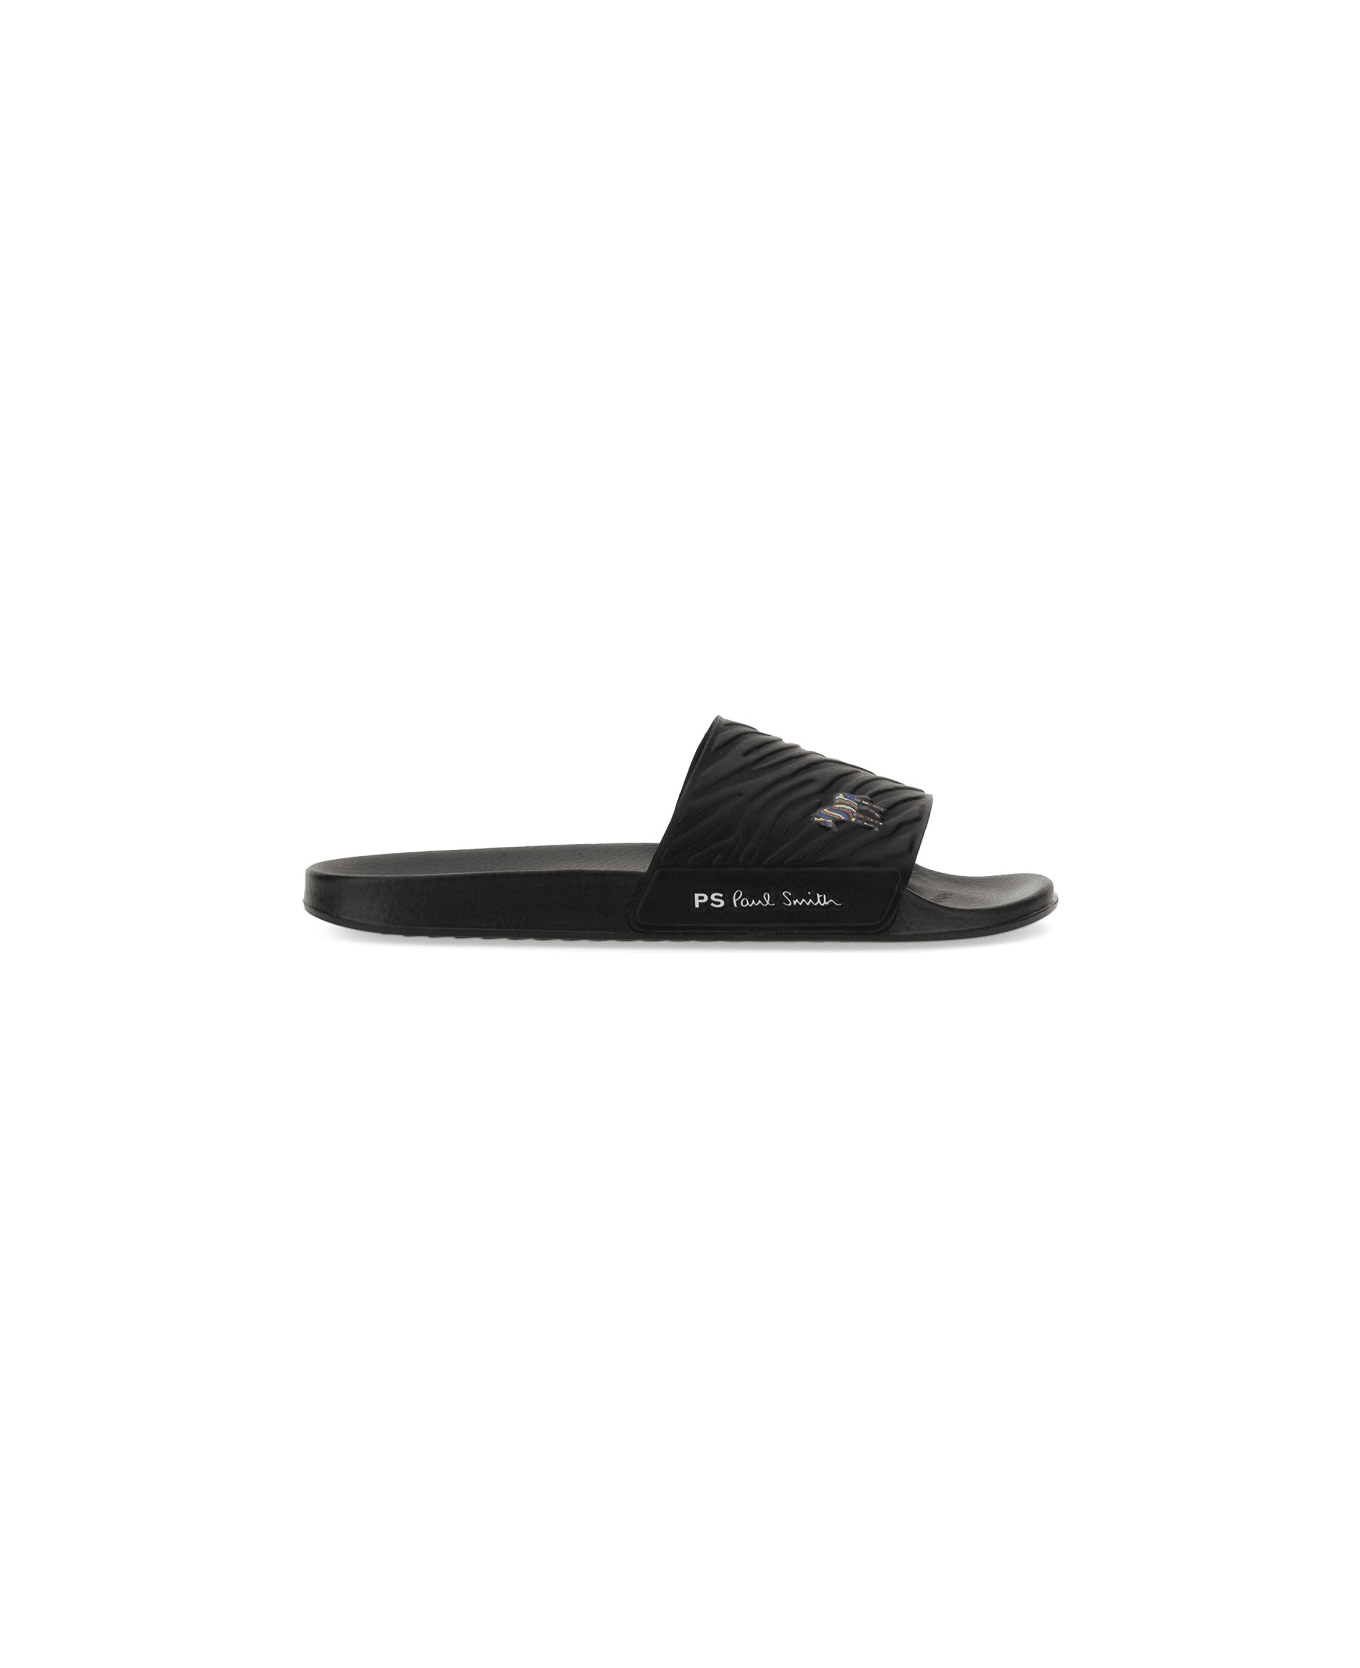 PS by Paul Smith Sandle "zebra" - BLACK その他各種シューズ